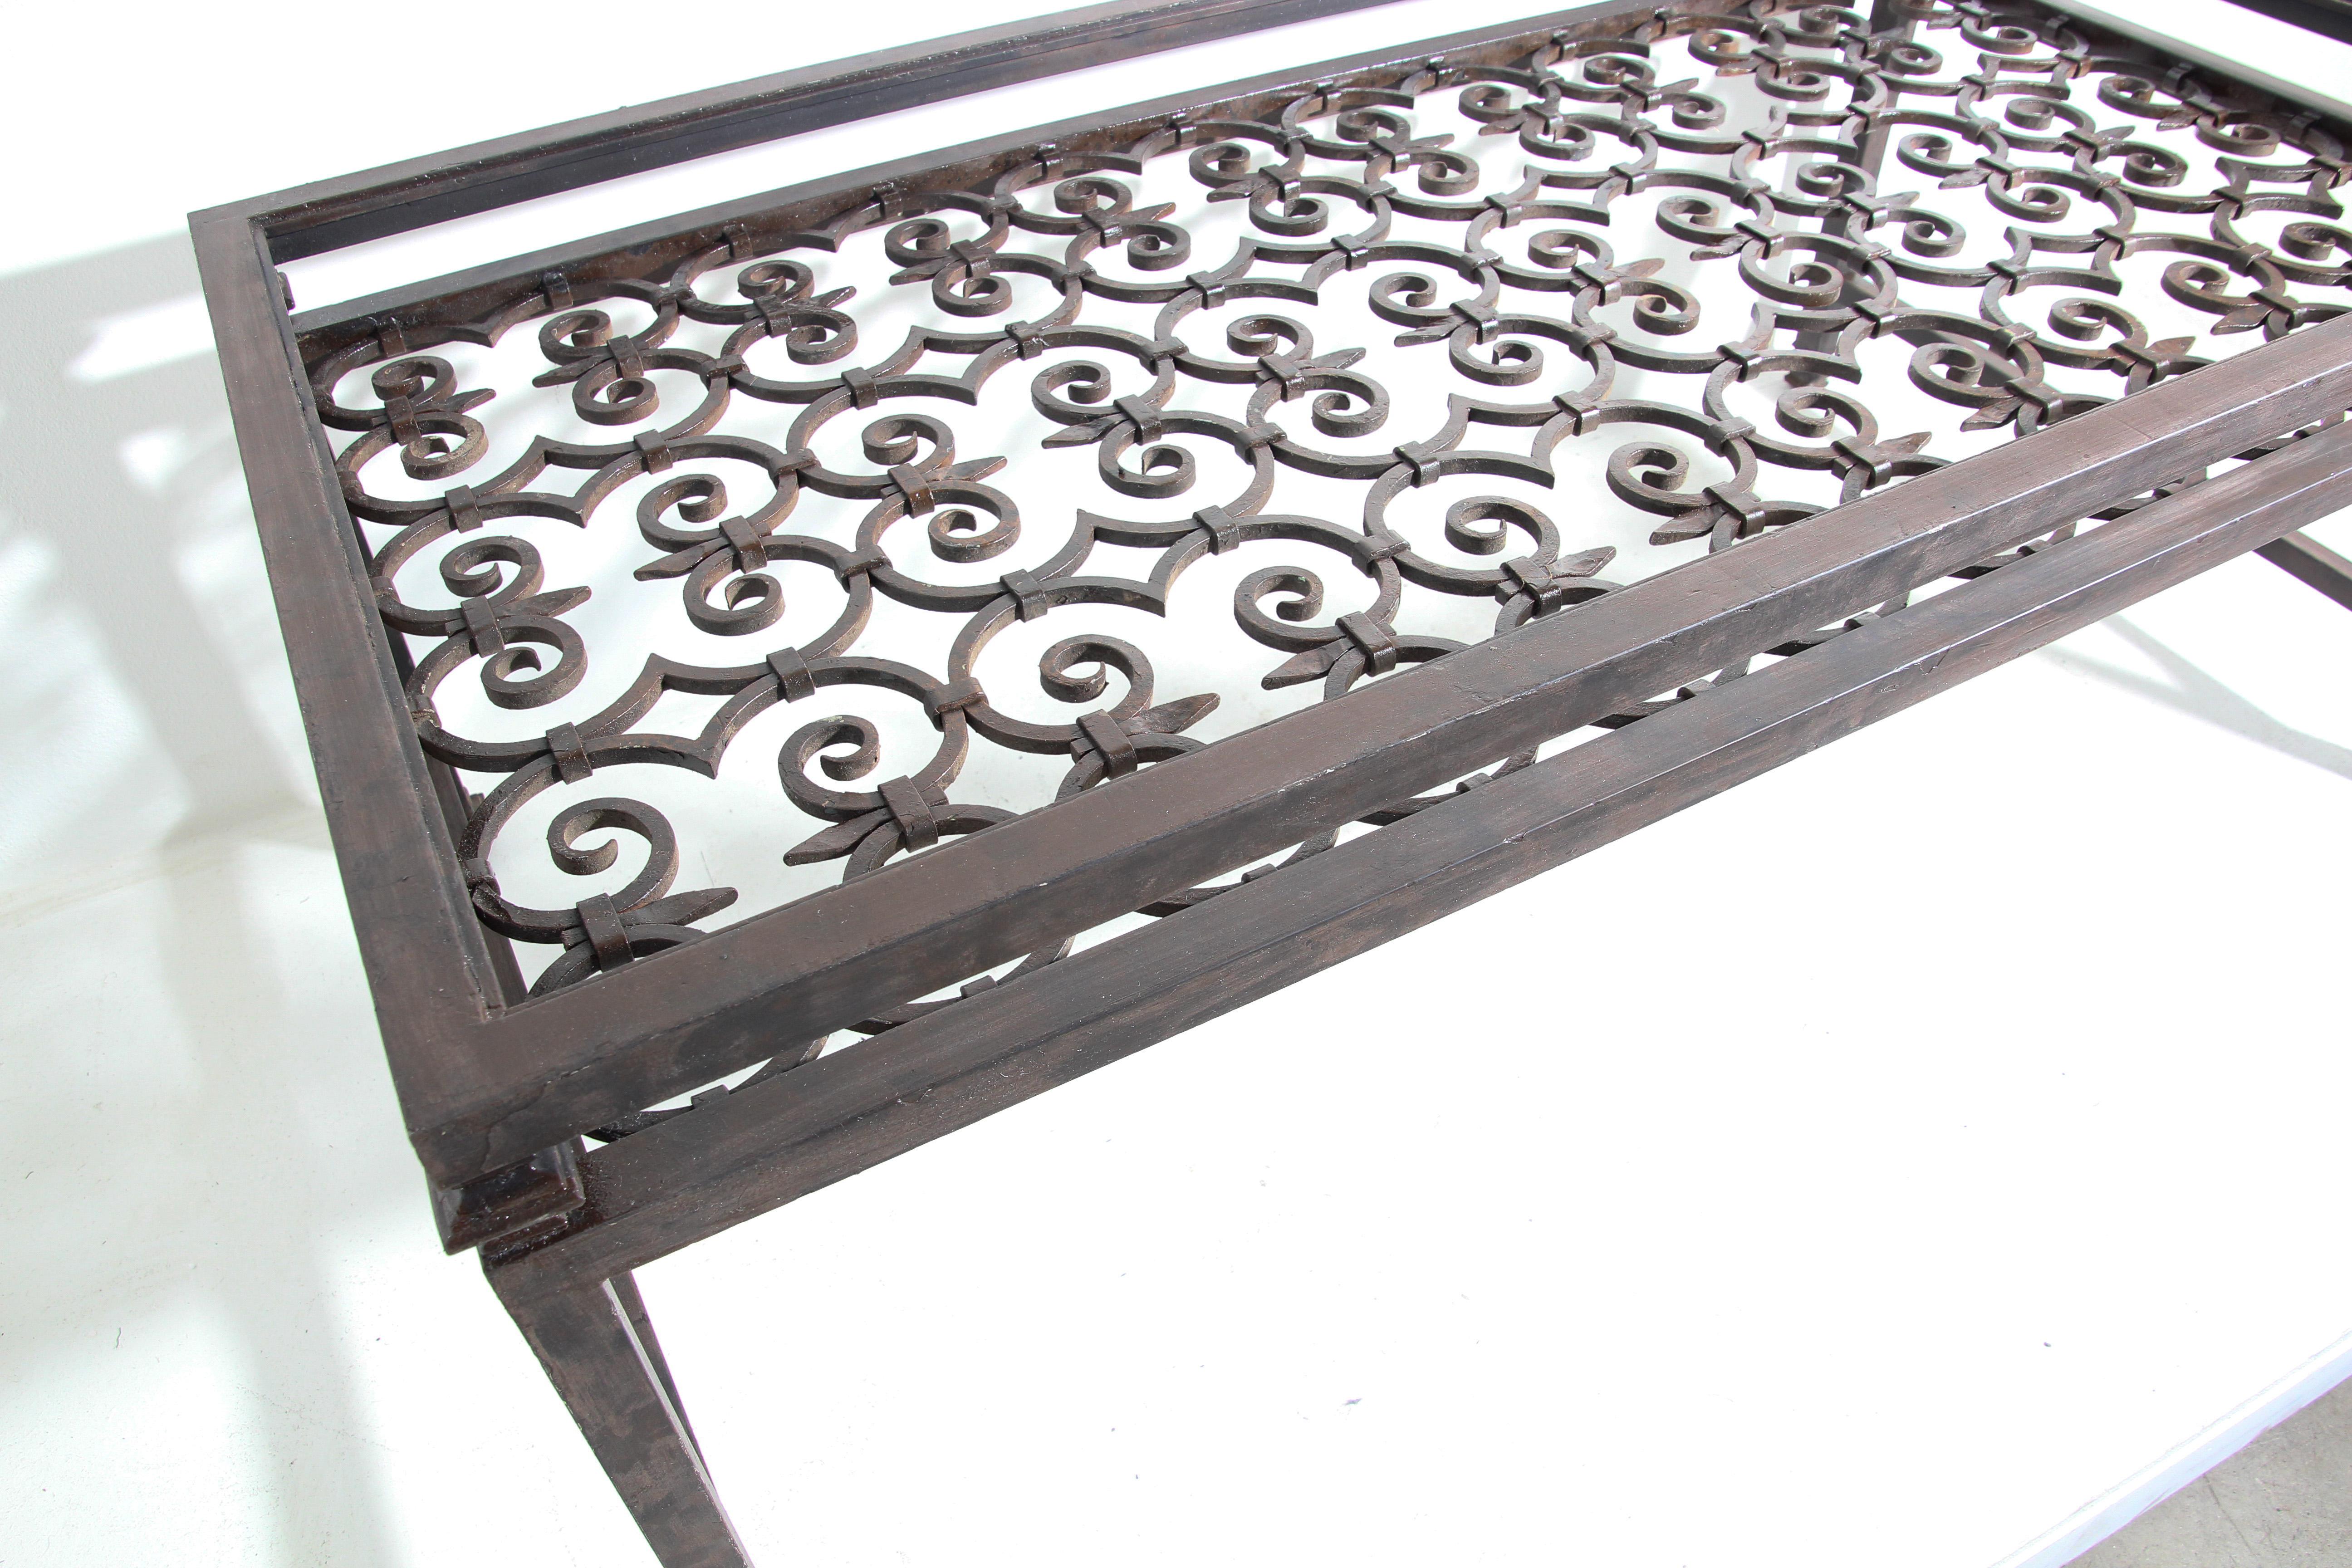 Hand-Crafted Spanish Revival Wrought Iron Table Base Rectangular Shape Indoor or Outdoor